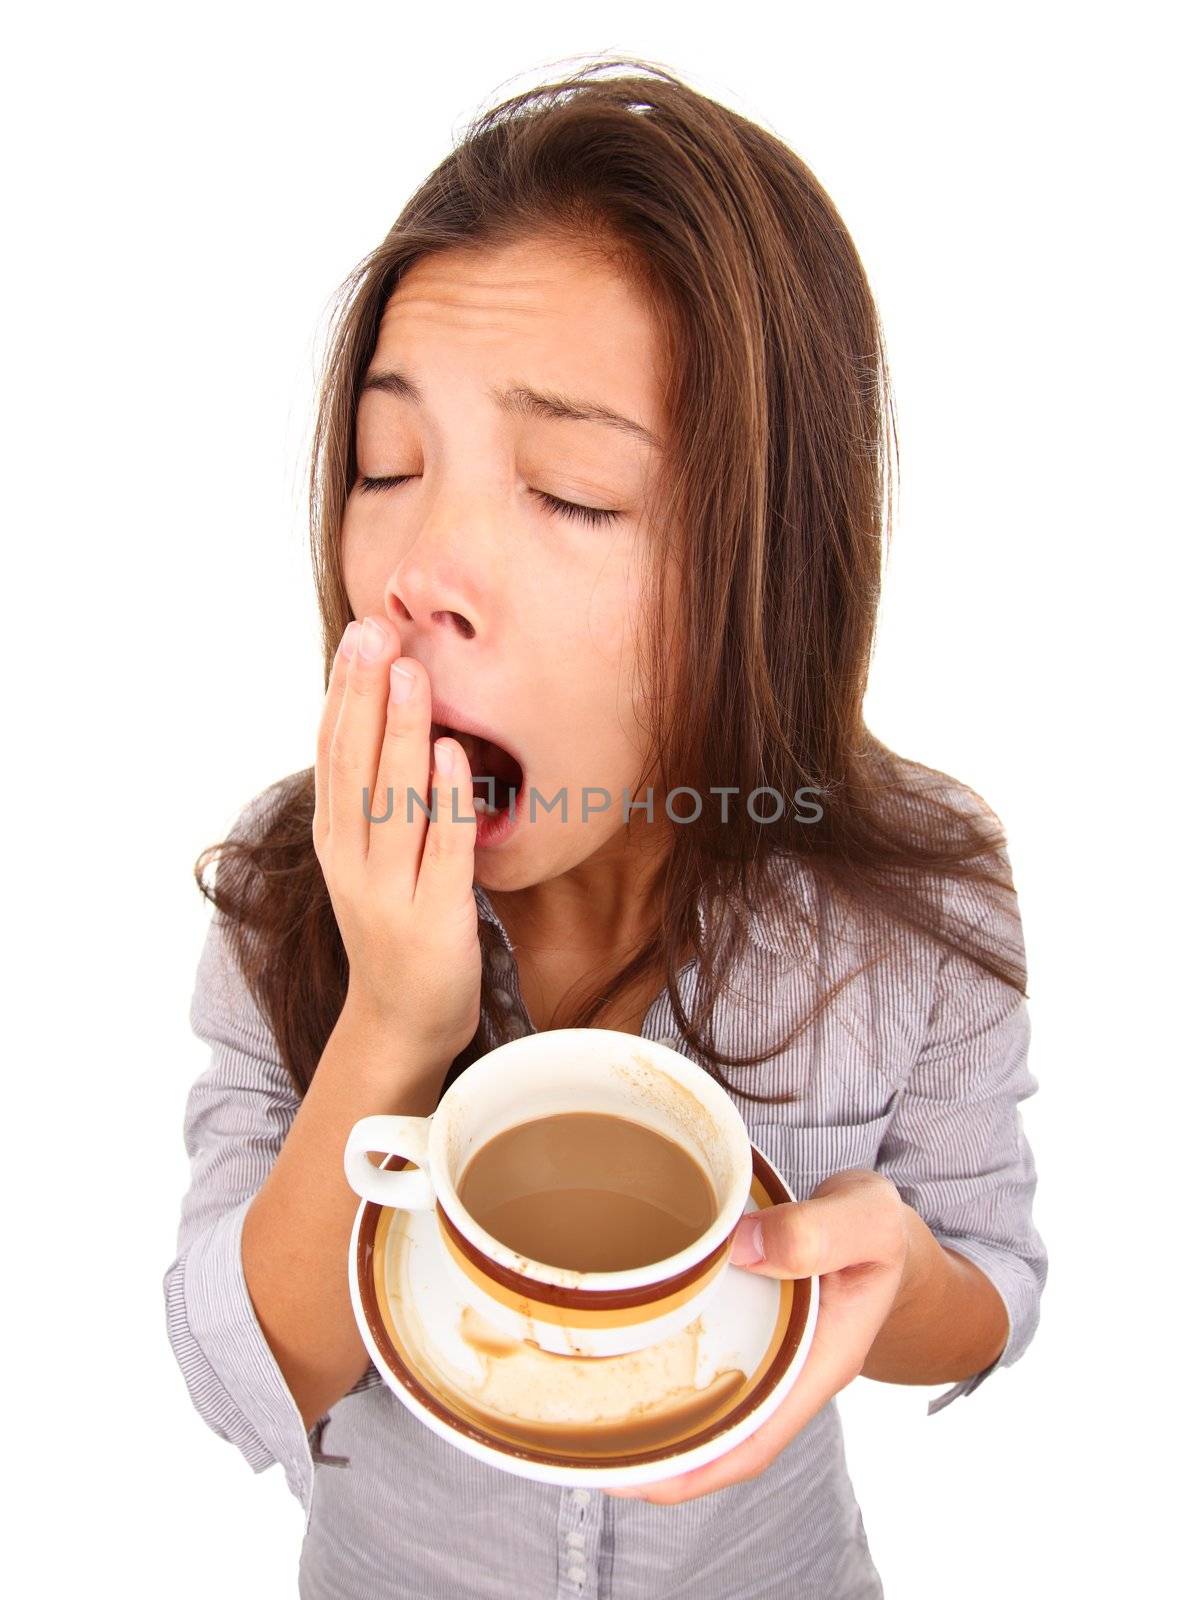 Tired woman yawning spilled a little coffe. Beautiful mixed race asian / caucasian model isolated on white background.